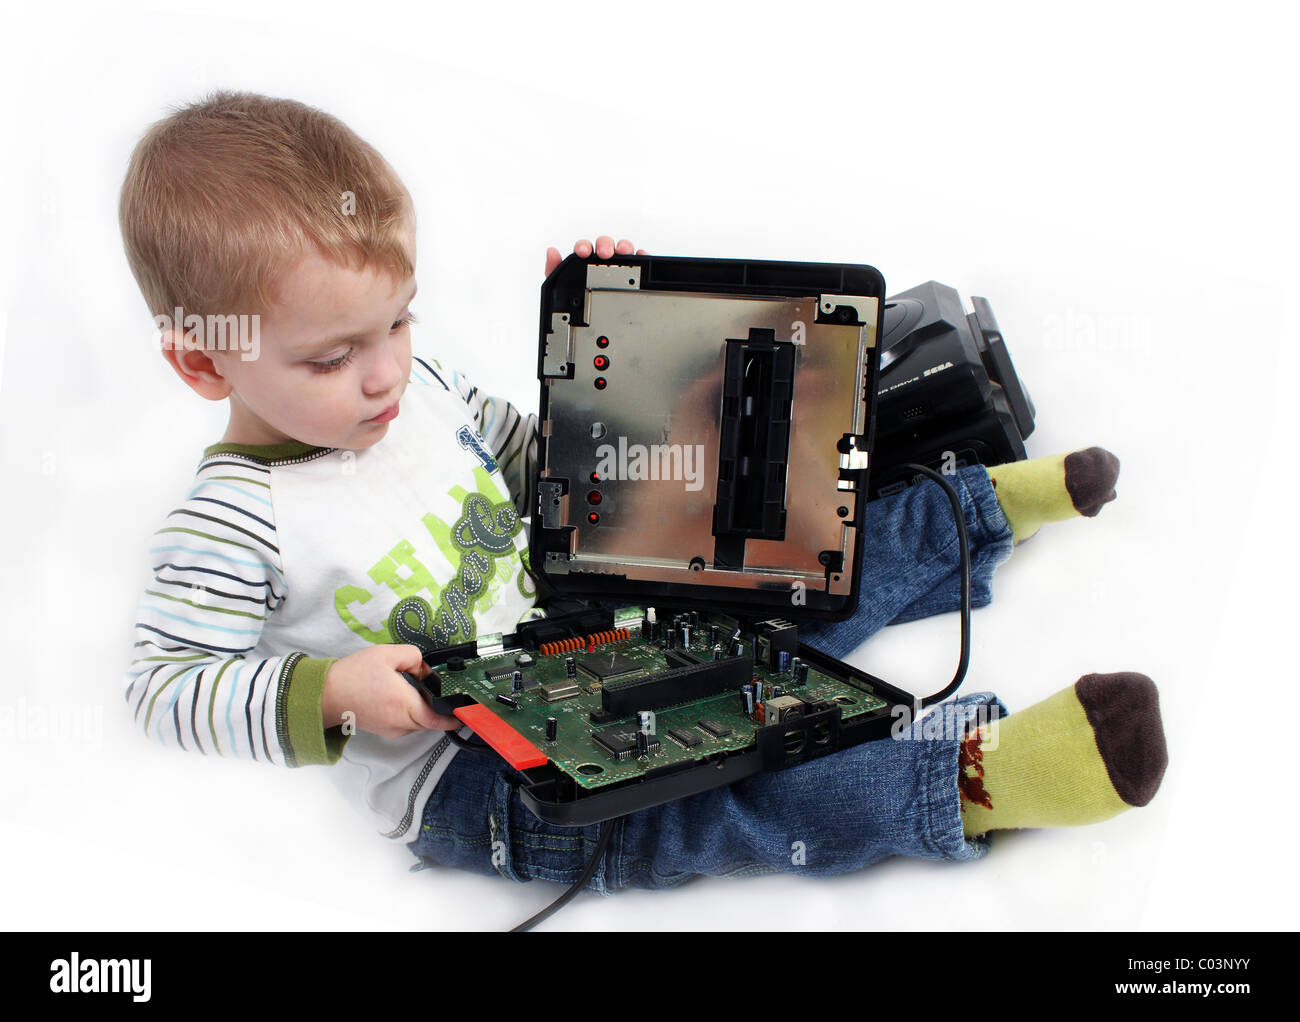 An inquisitive young toddler boy opening up a Sega Mega Drive retro gaming console and looking inside to see how it works Stock Photo